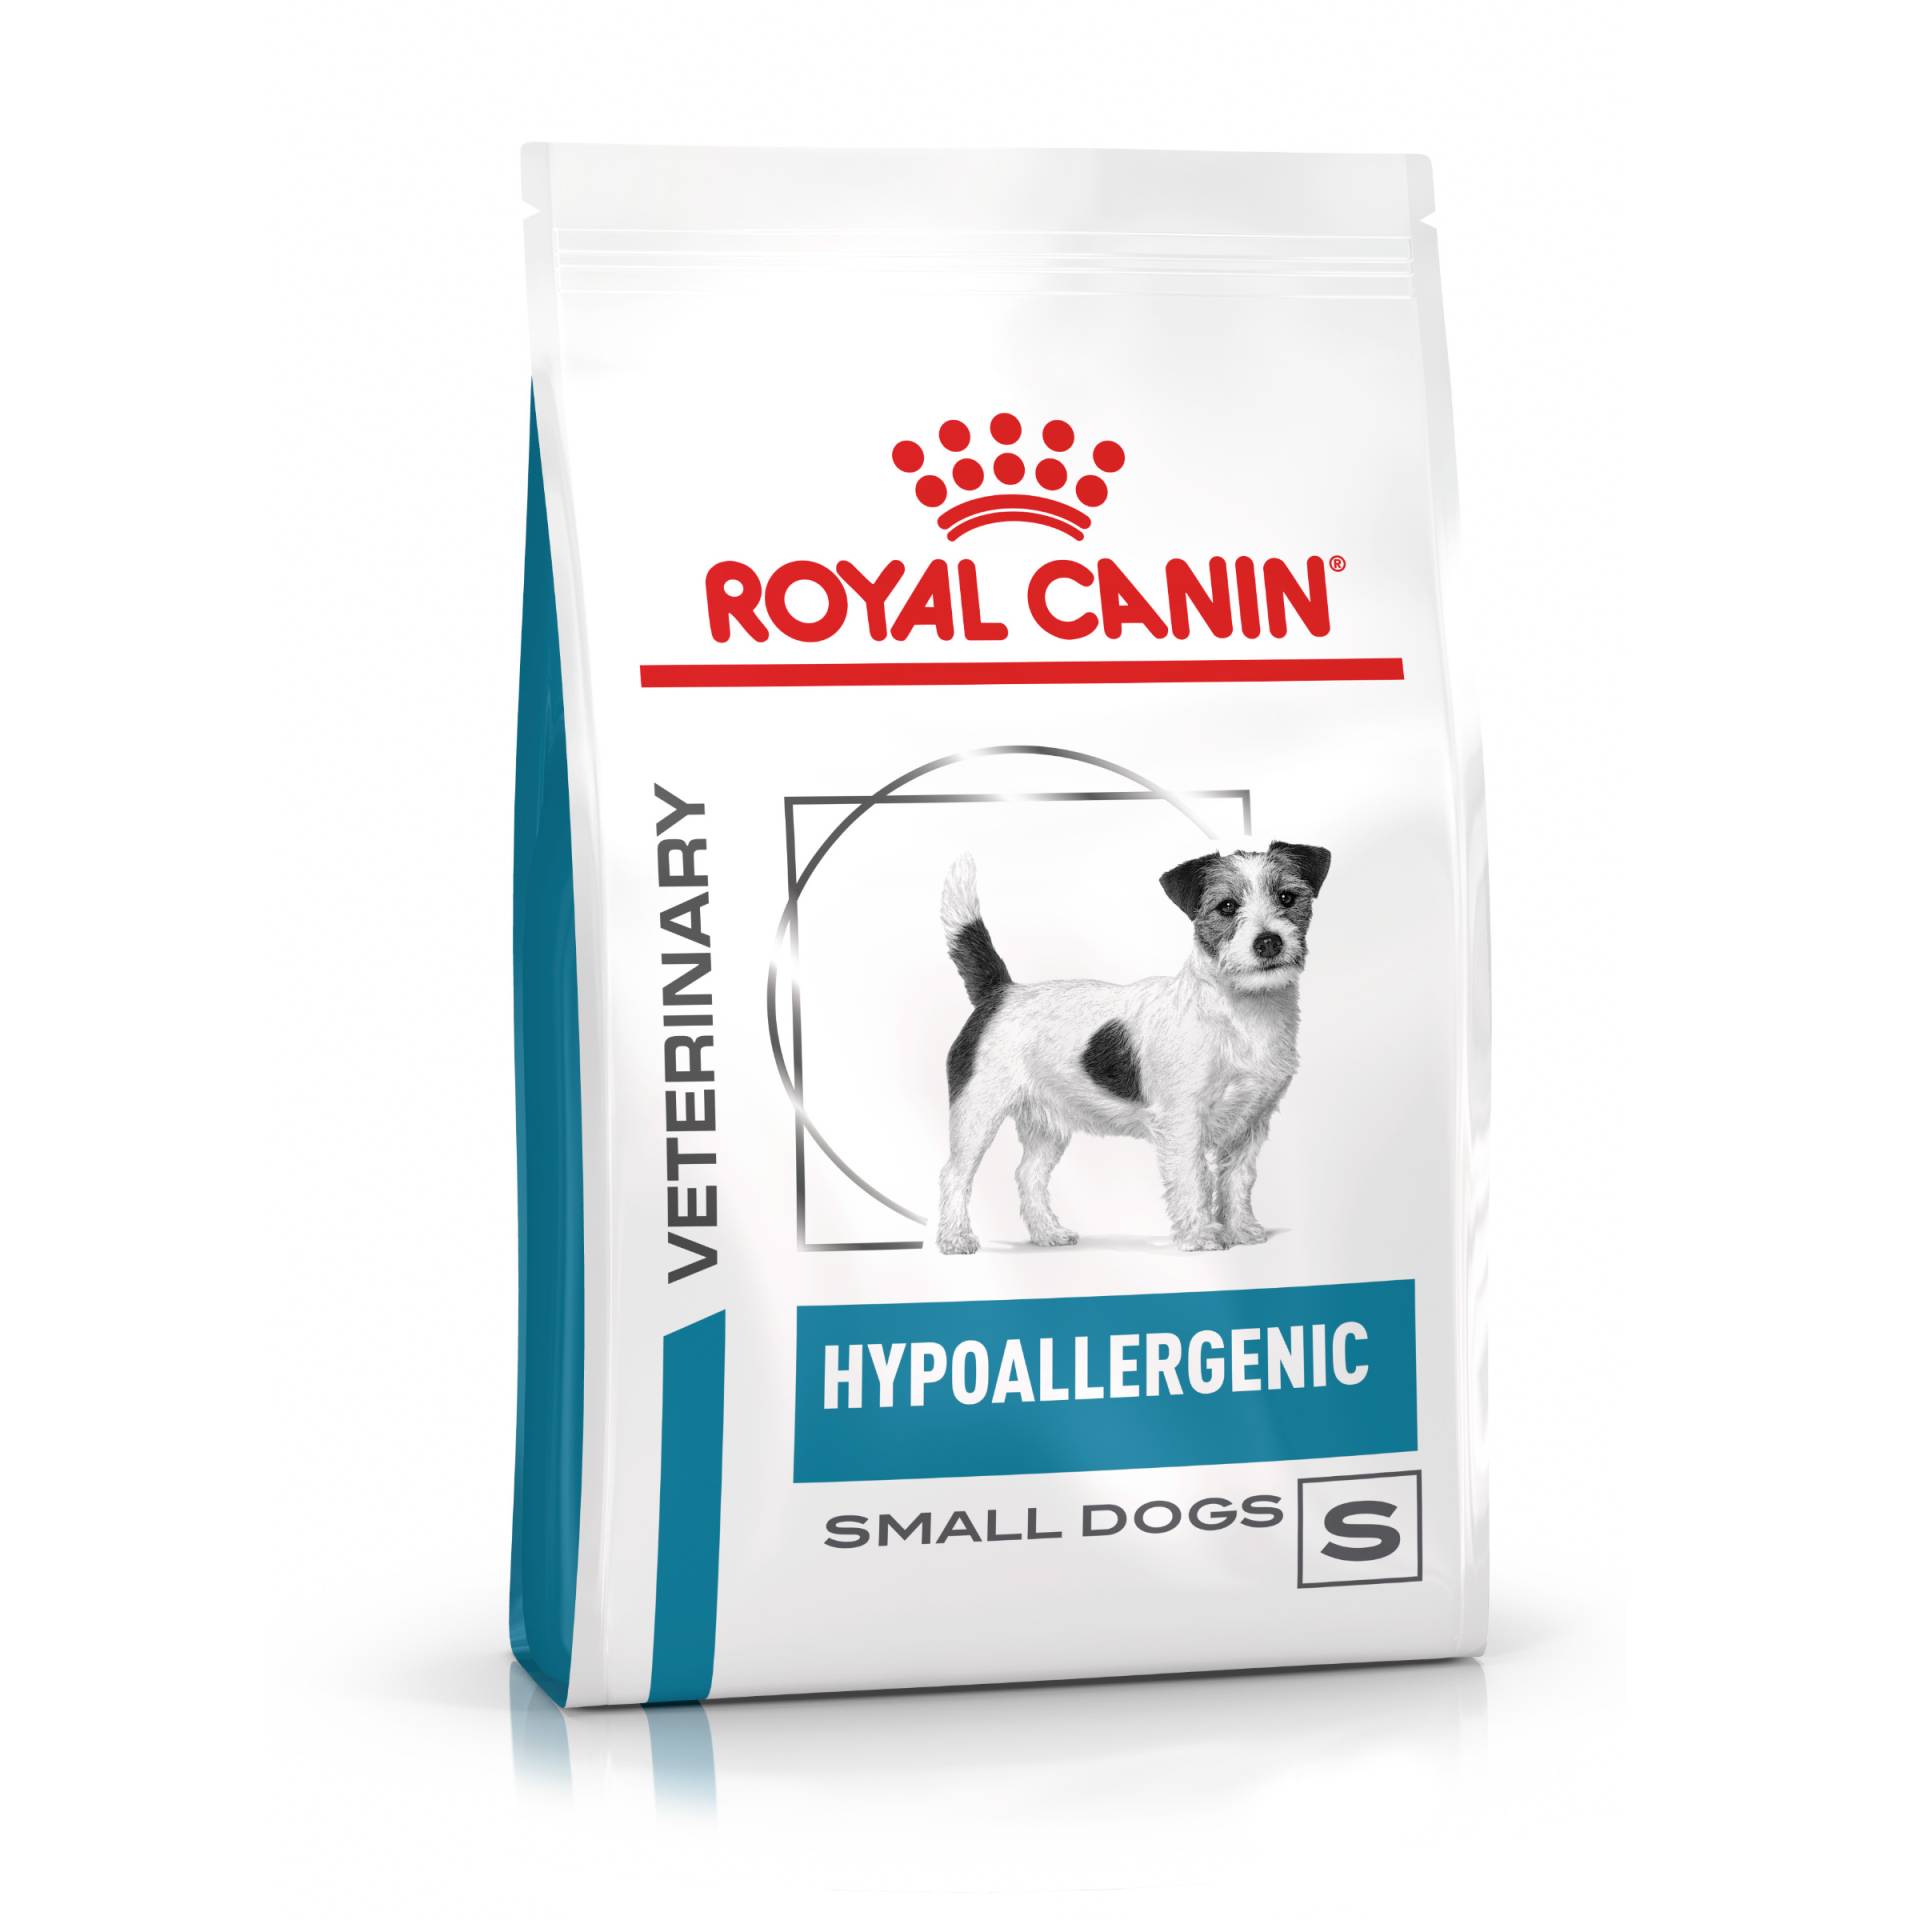 Royal Canin Veterinary Canine Hypoallergenic Small Dog - Sparpaket: 2 x 3,5 kg von Royal Canin Veterinary Diet